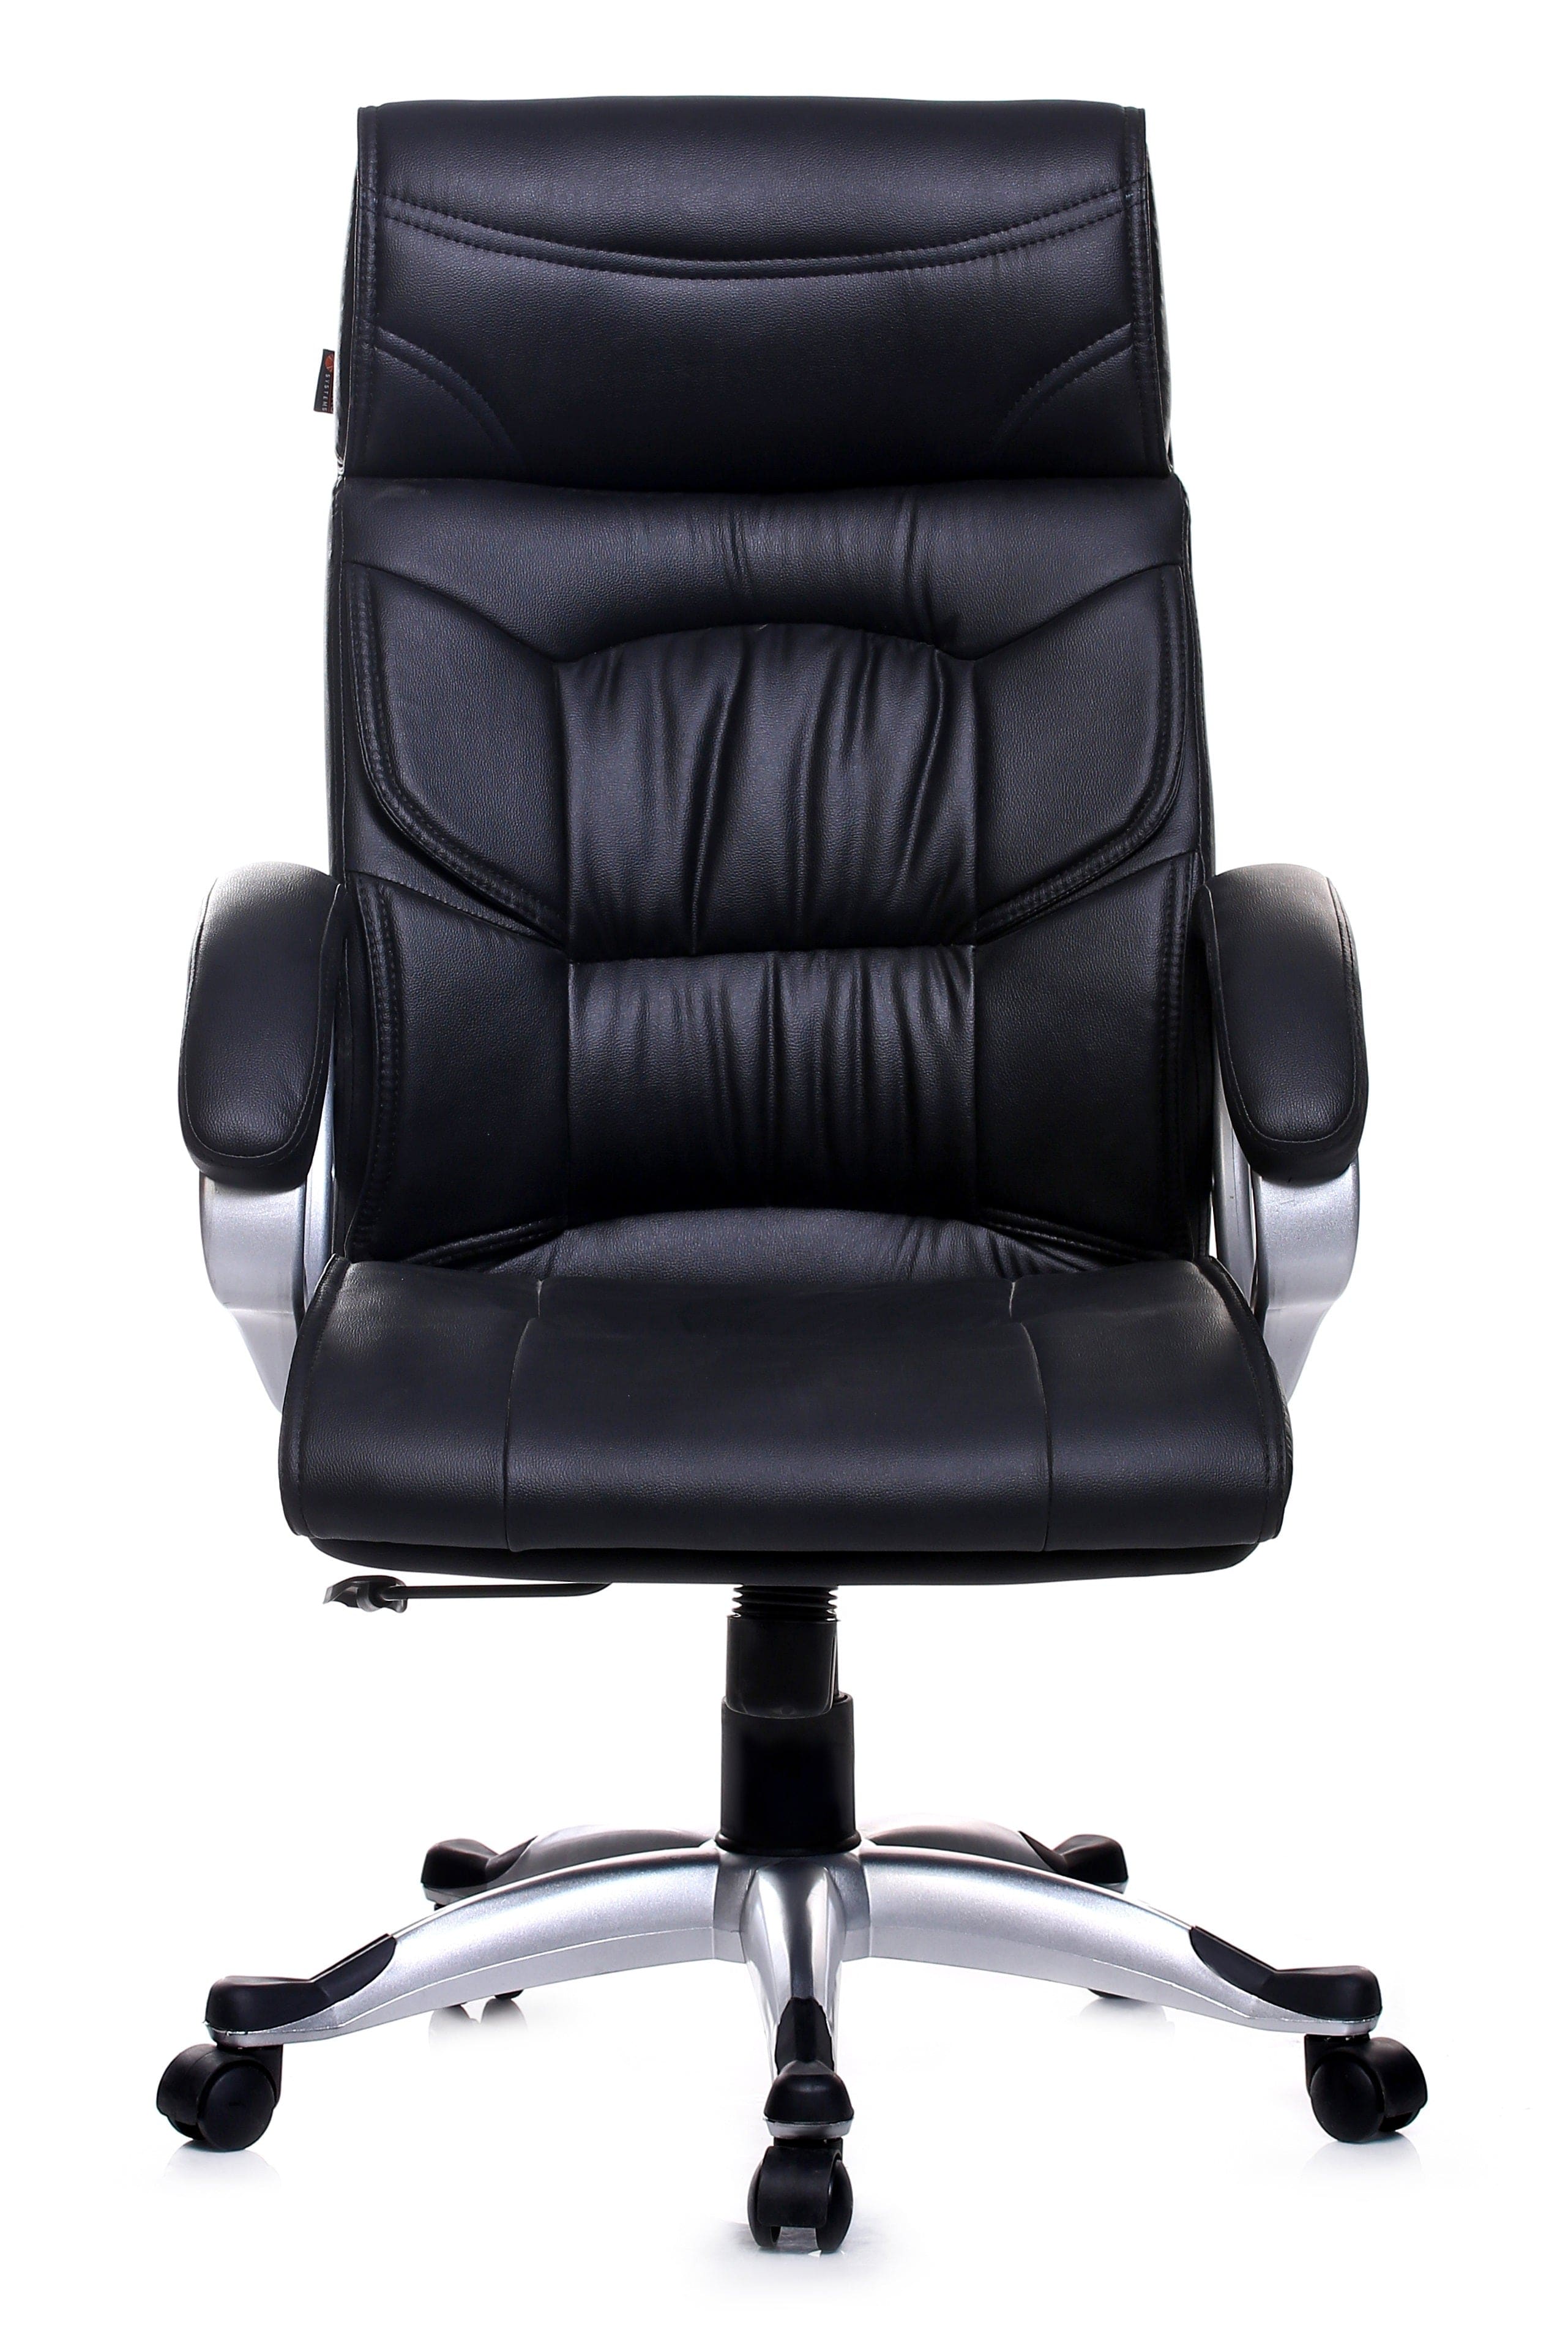 Stylish Executive Chair in Black Colour by Adiko Systems